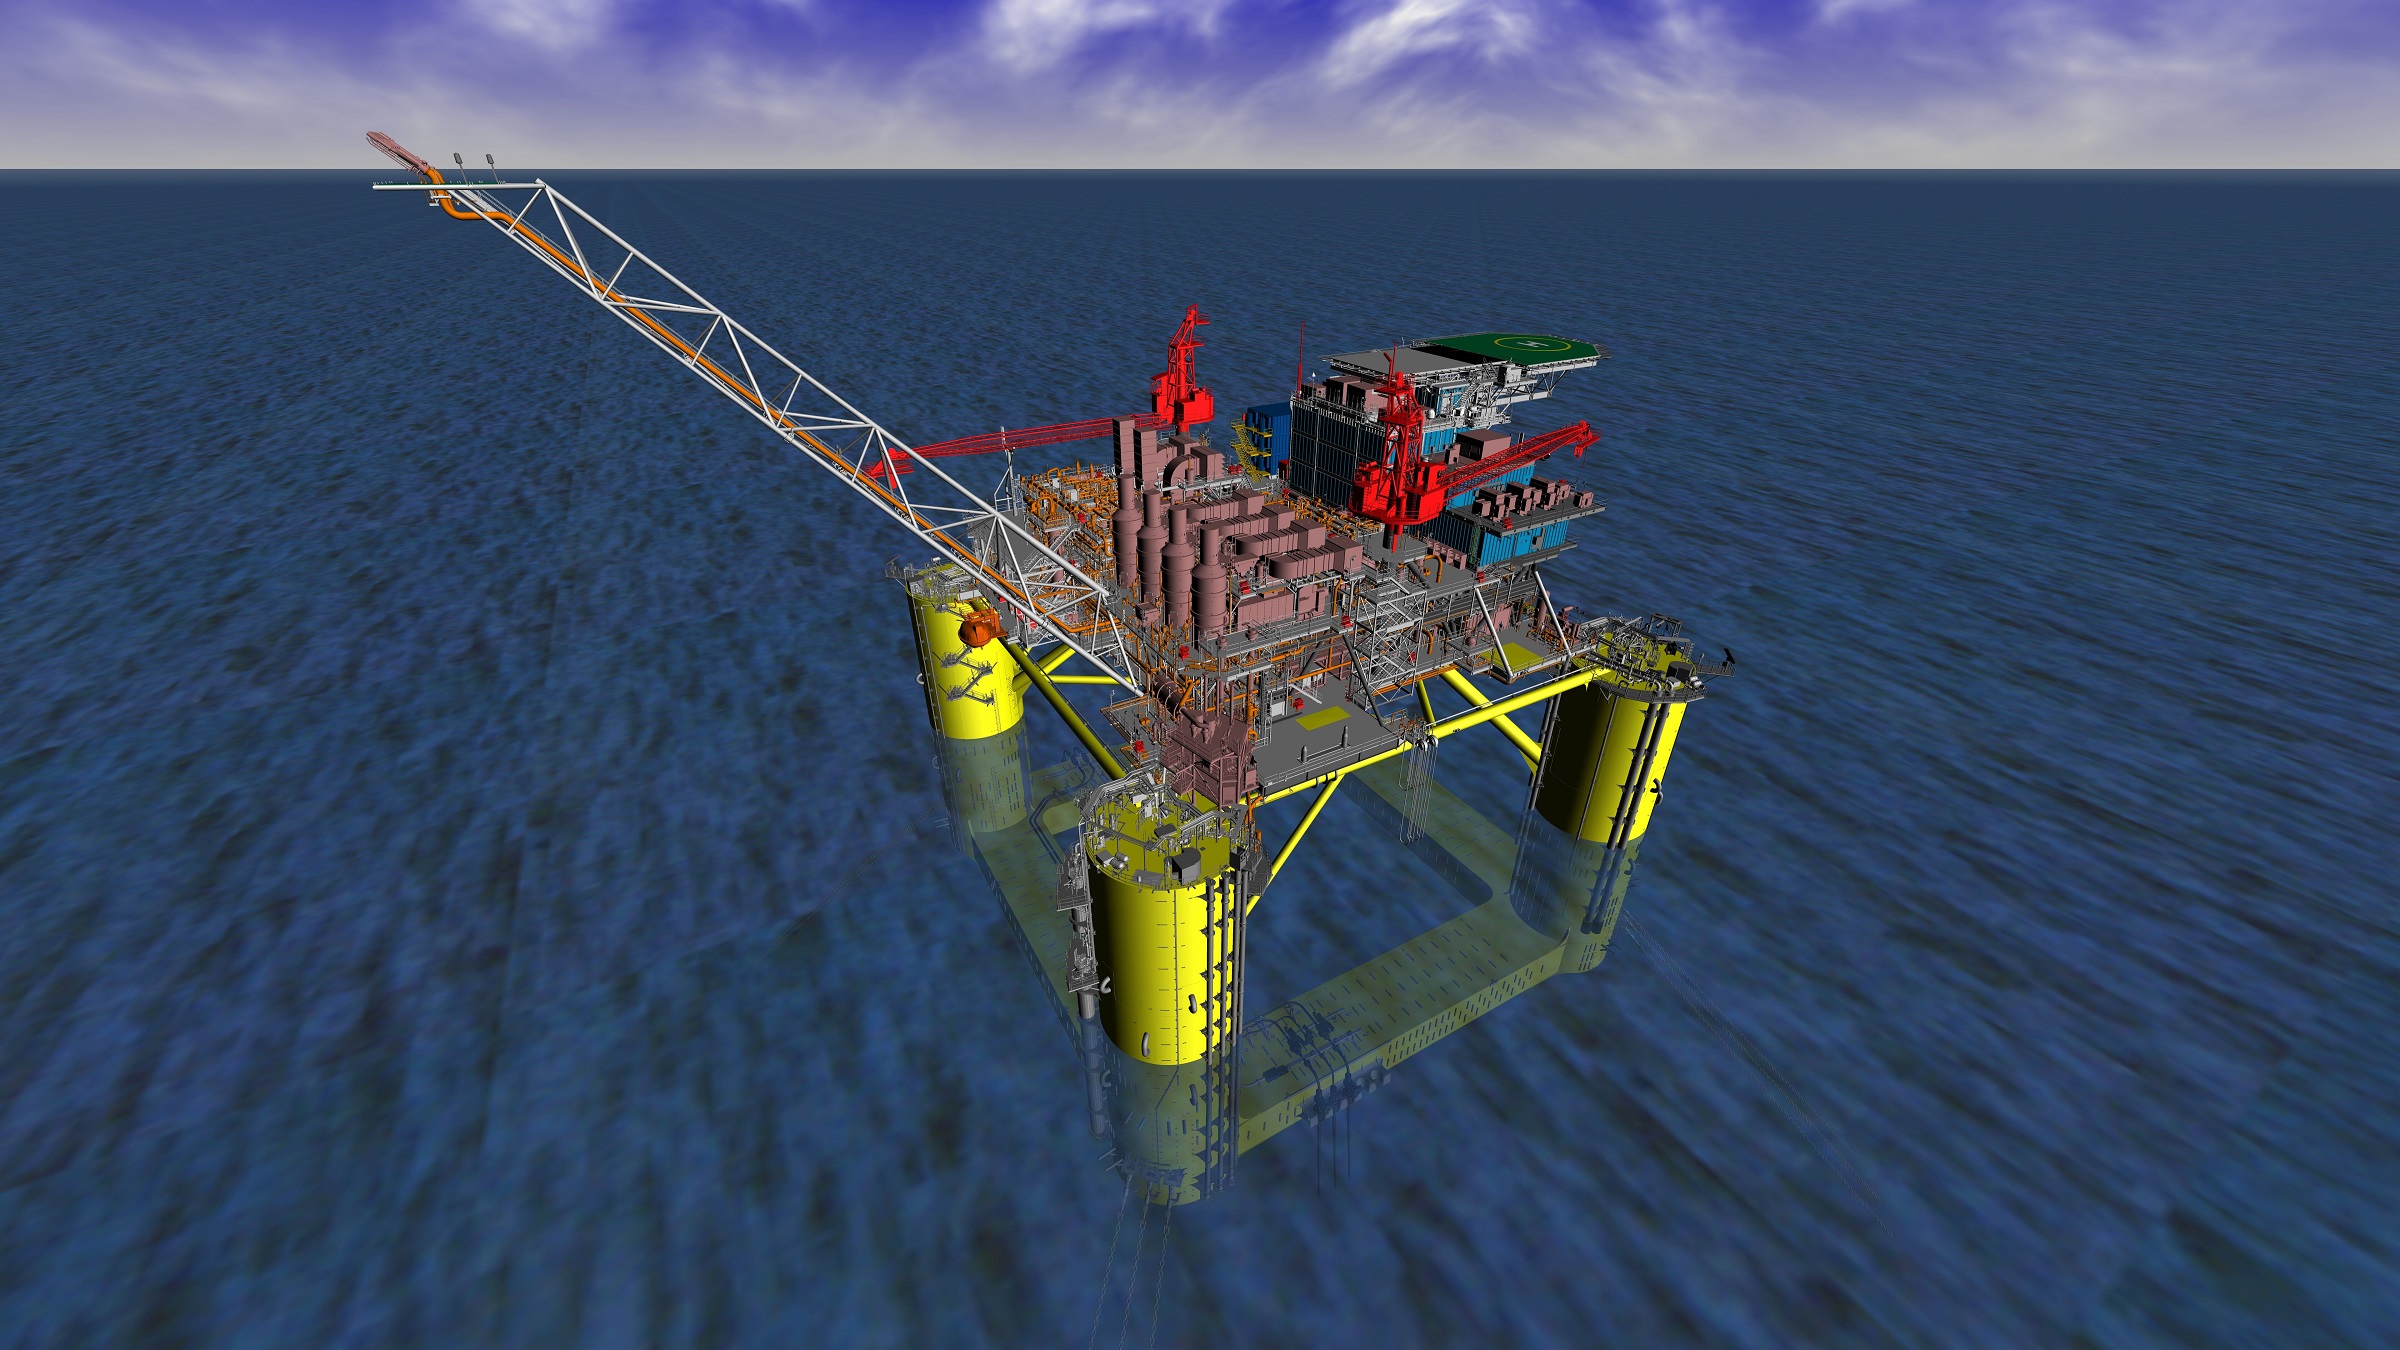 Sembcorp Marine Secures FPU Construction and Integration Contract for Shell’s Whale Field Development in Gulf of Mexico